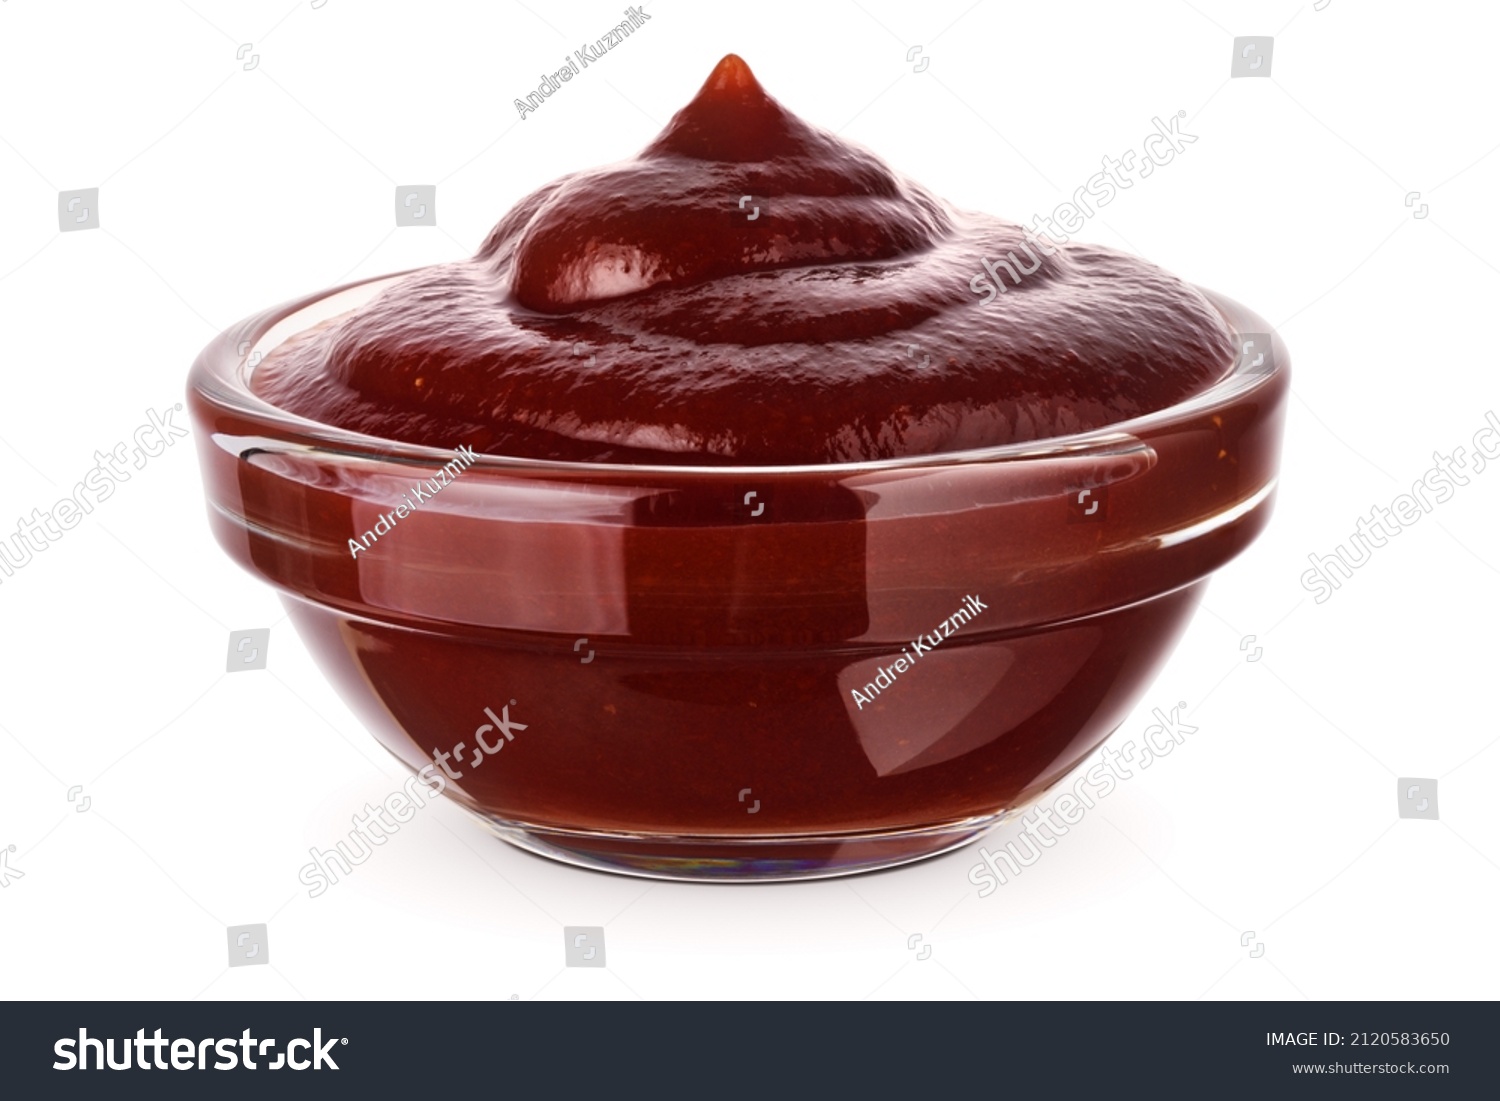 Barbecue sauce in glass transparent bowl, close-up. Isolated on white background. #2120583650